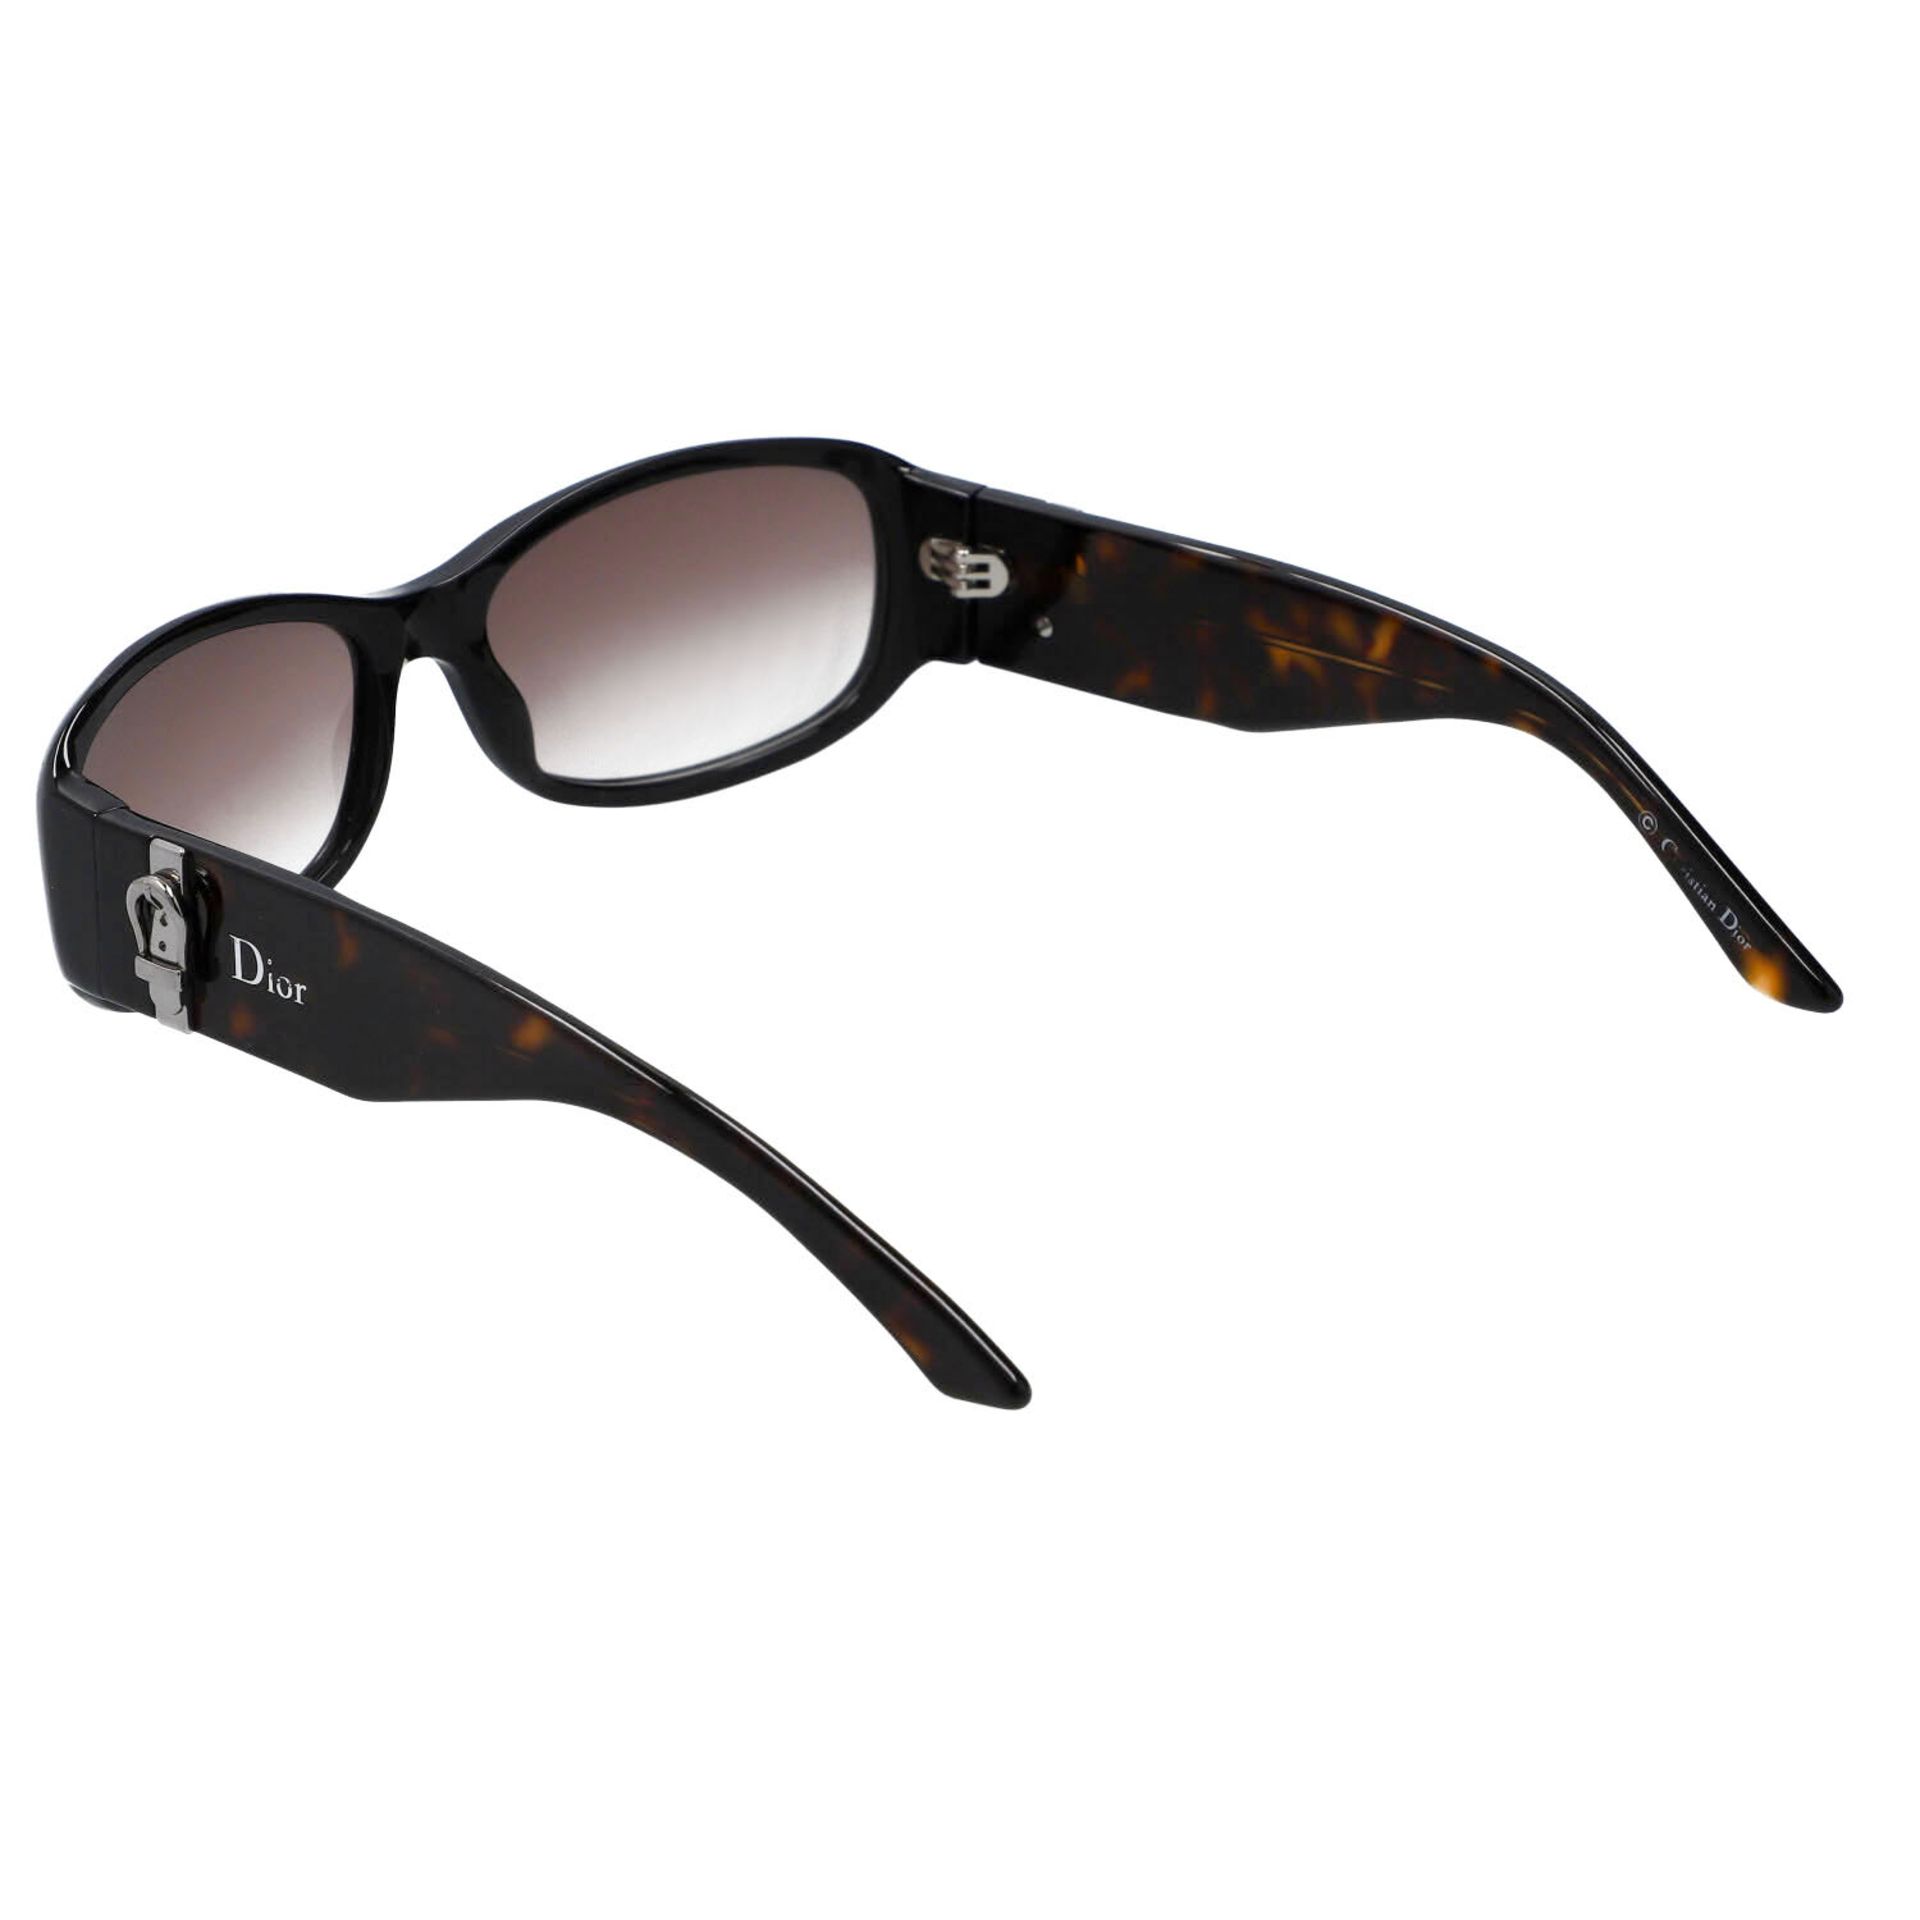 DIOR Sonnenbrille "MADE 2". - Image 5 of 6